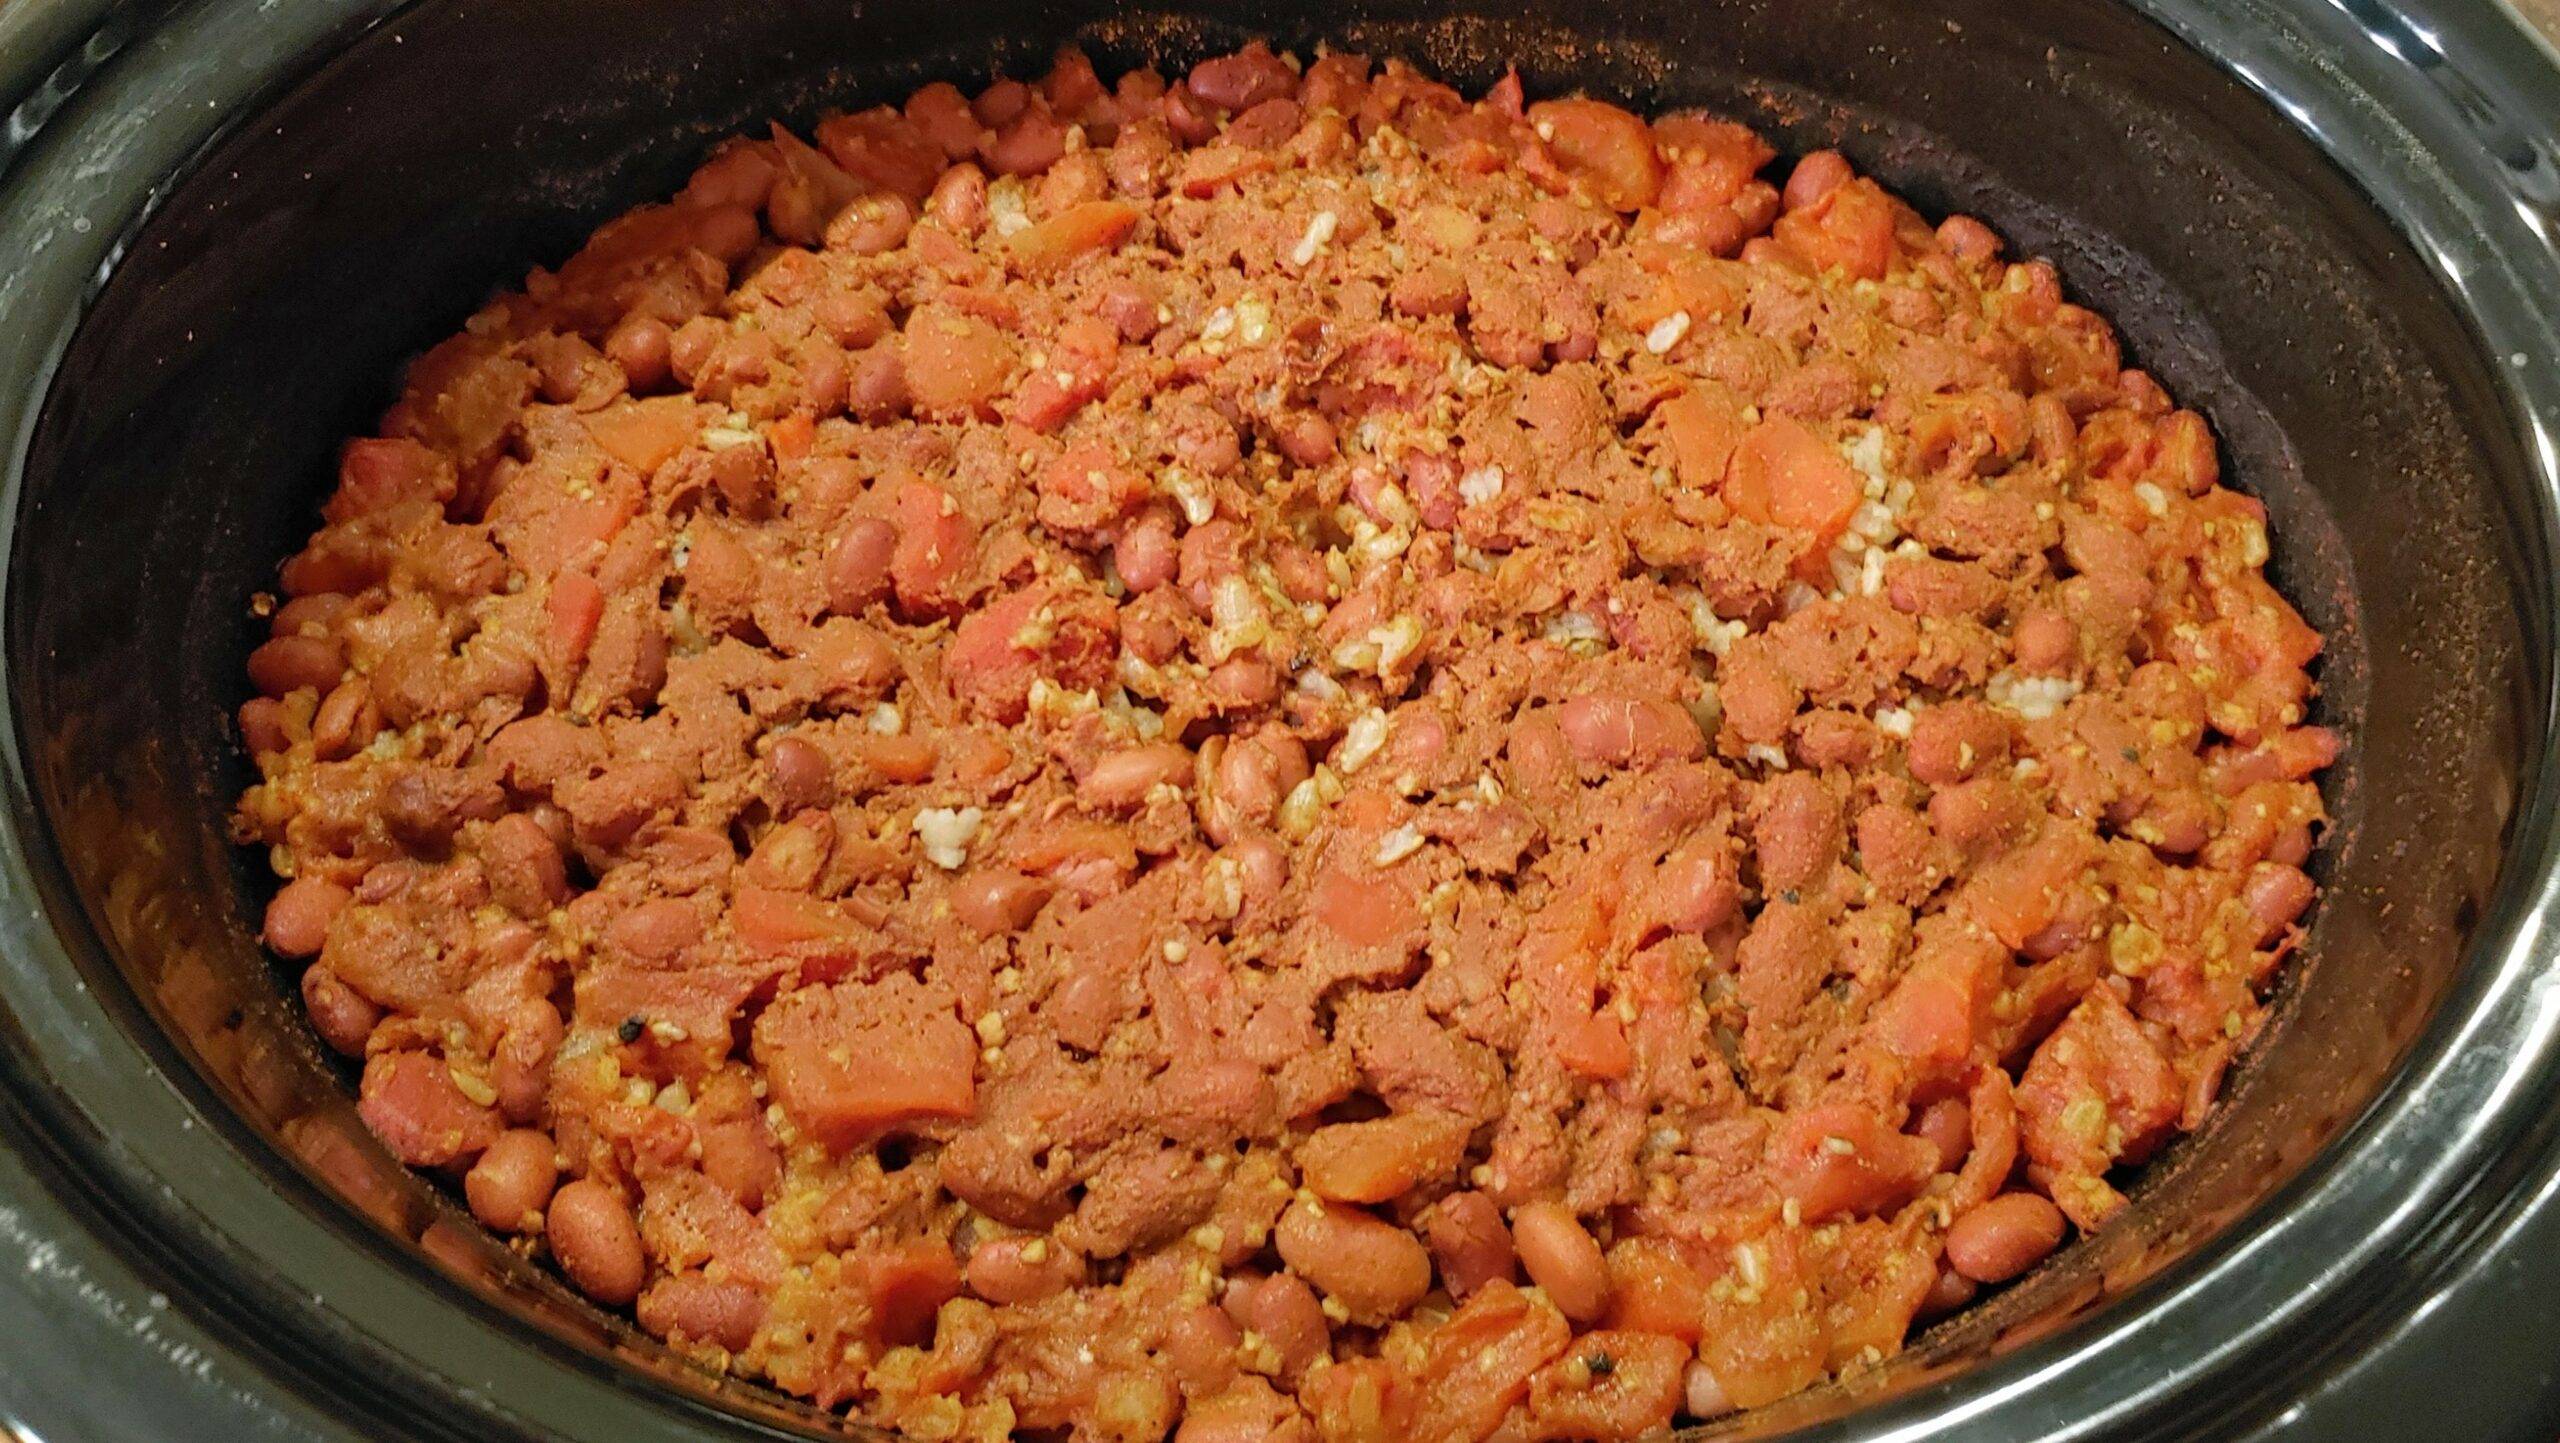 crockpot rice and beans - Dining in with Danielle